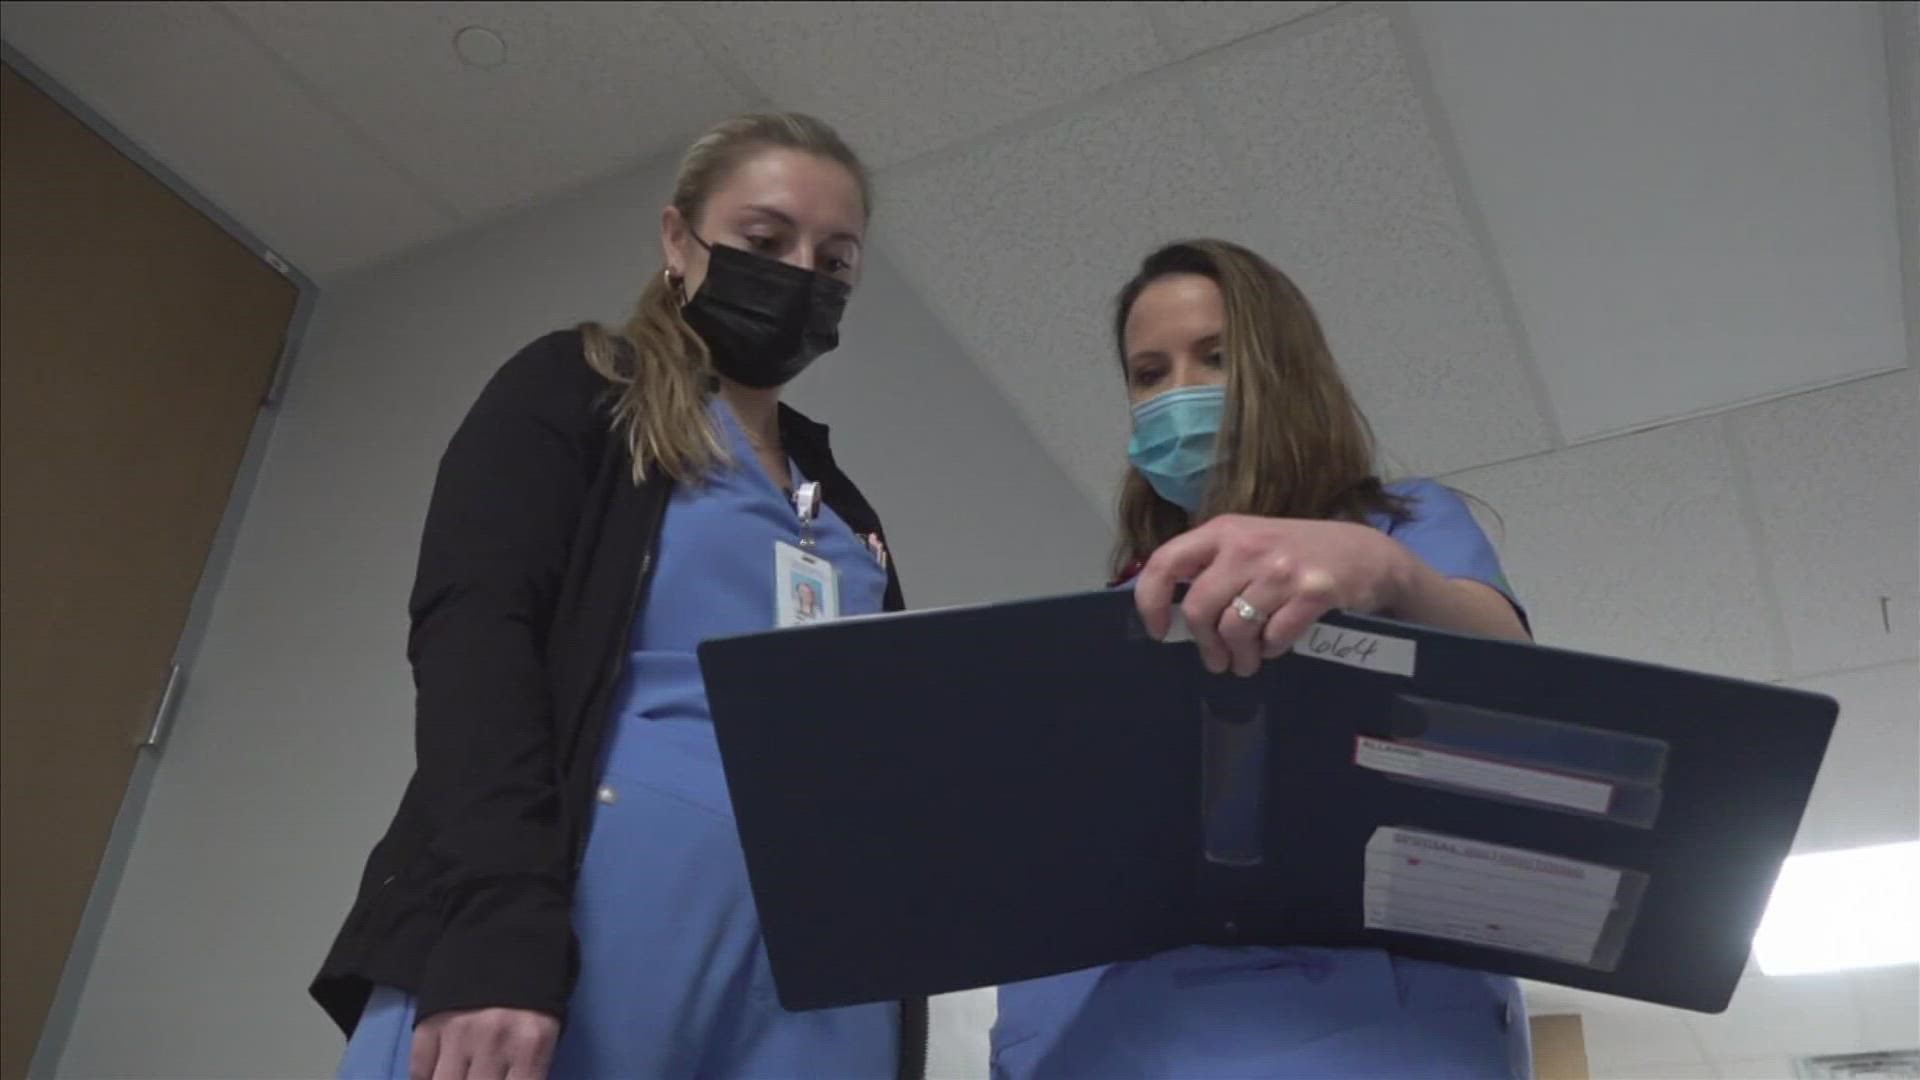 Hospital leaders said because of COVID, many new nursing graduates nationwide did not get the needed hands-on experience.